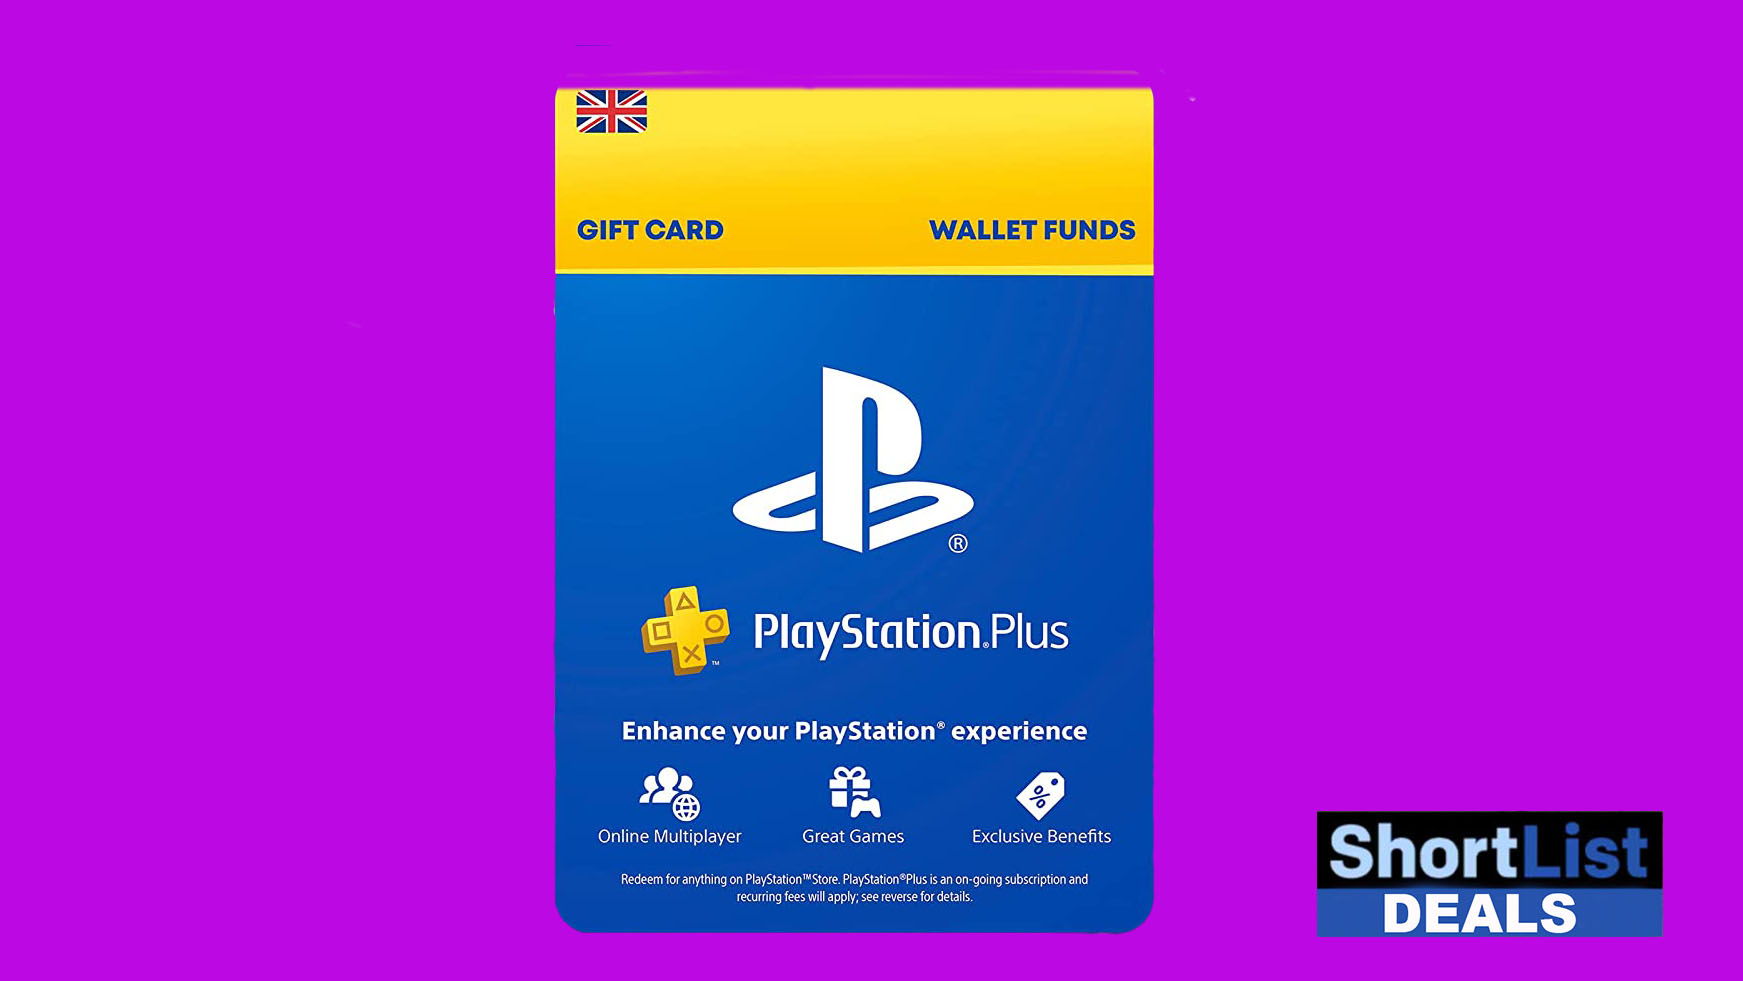 PlayStation Plus offers: Best deals on PS Plus subscriptions